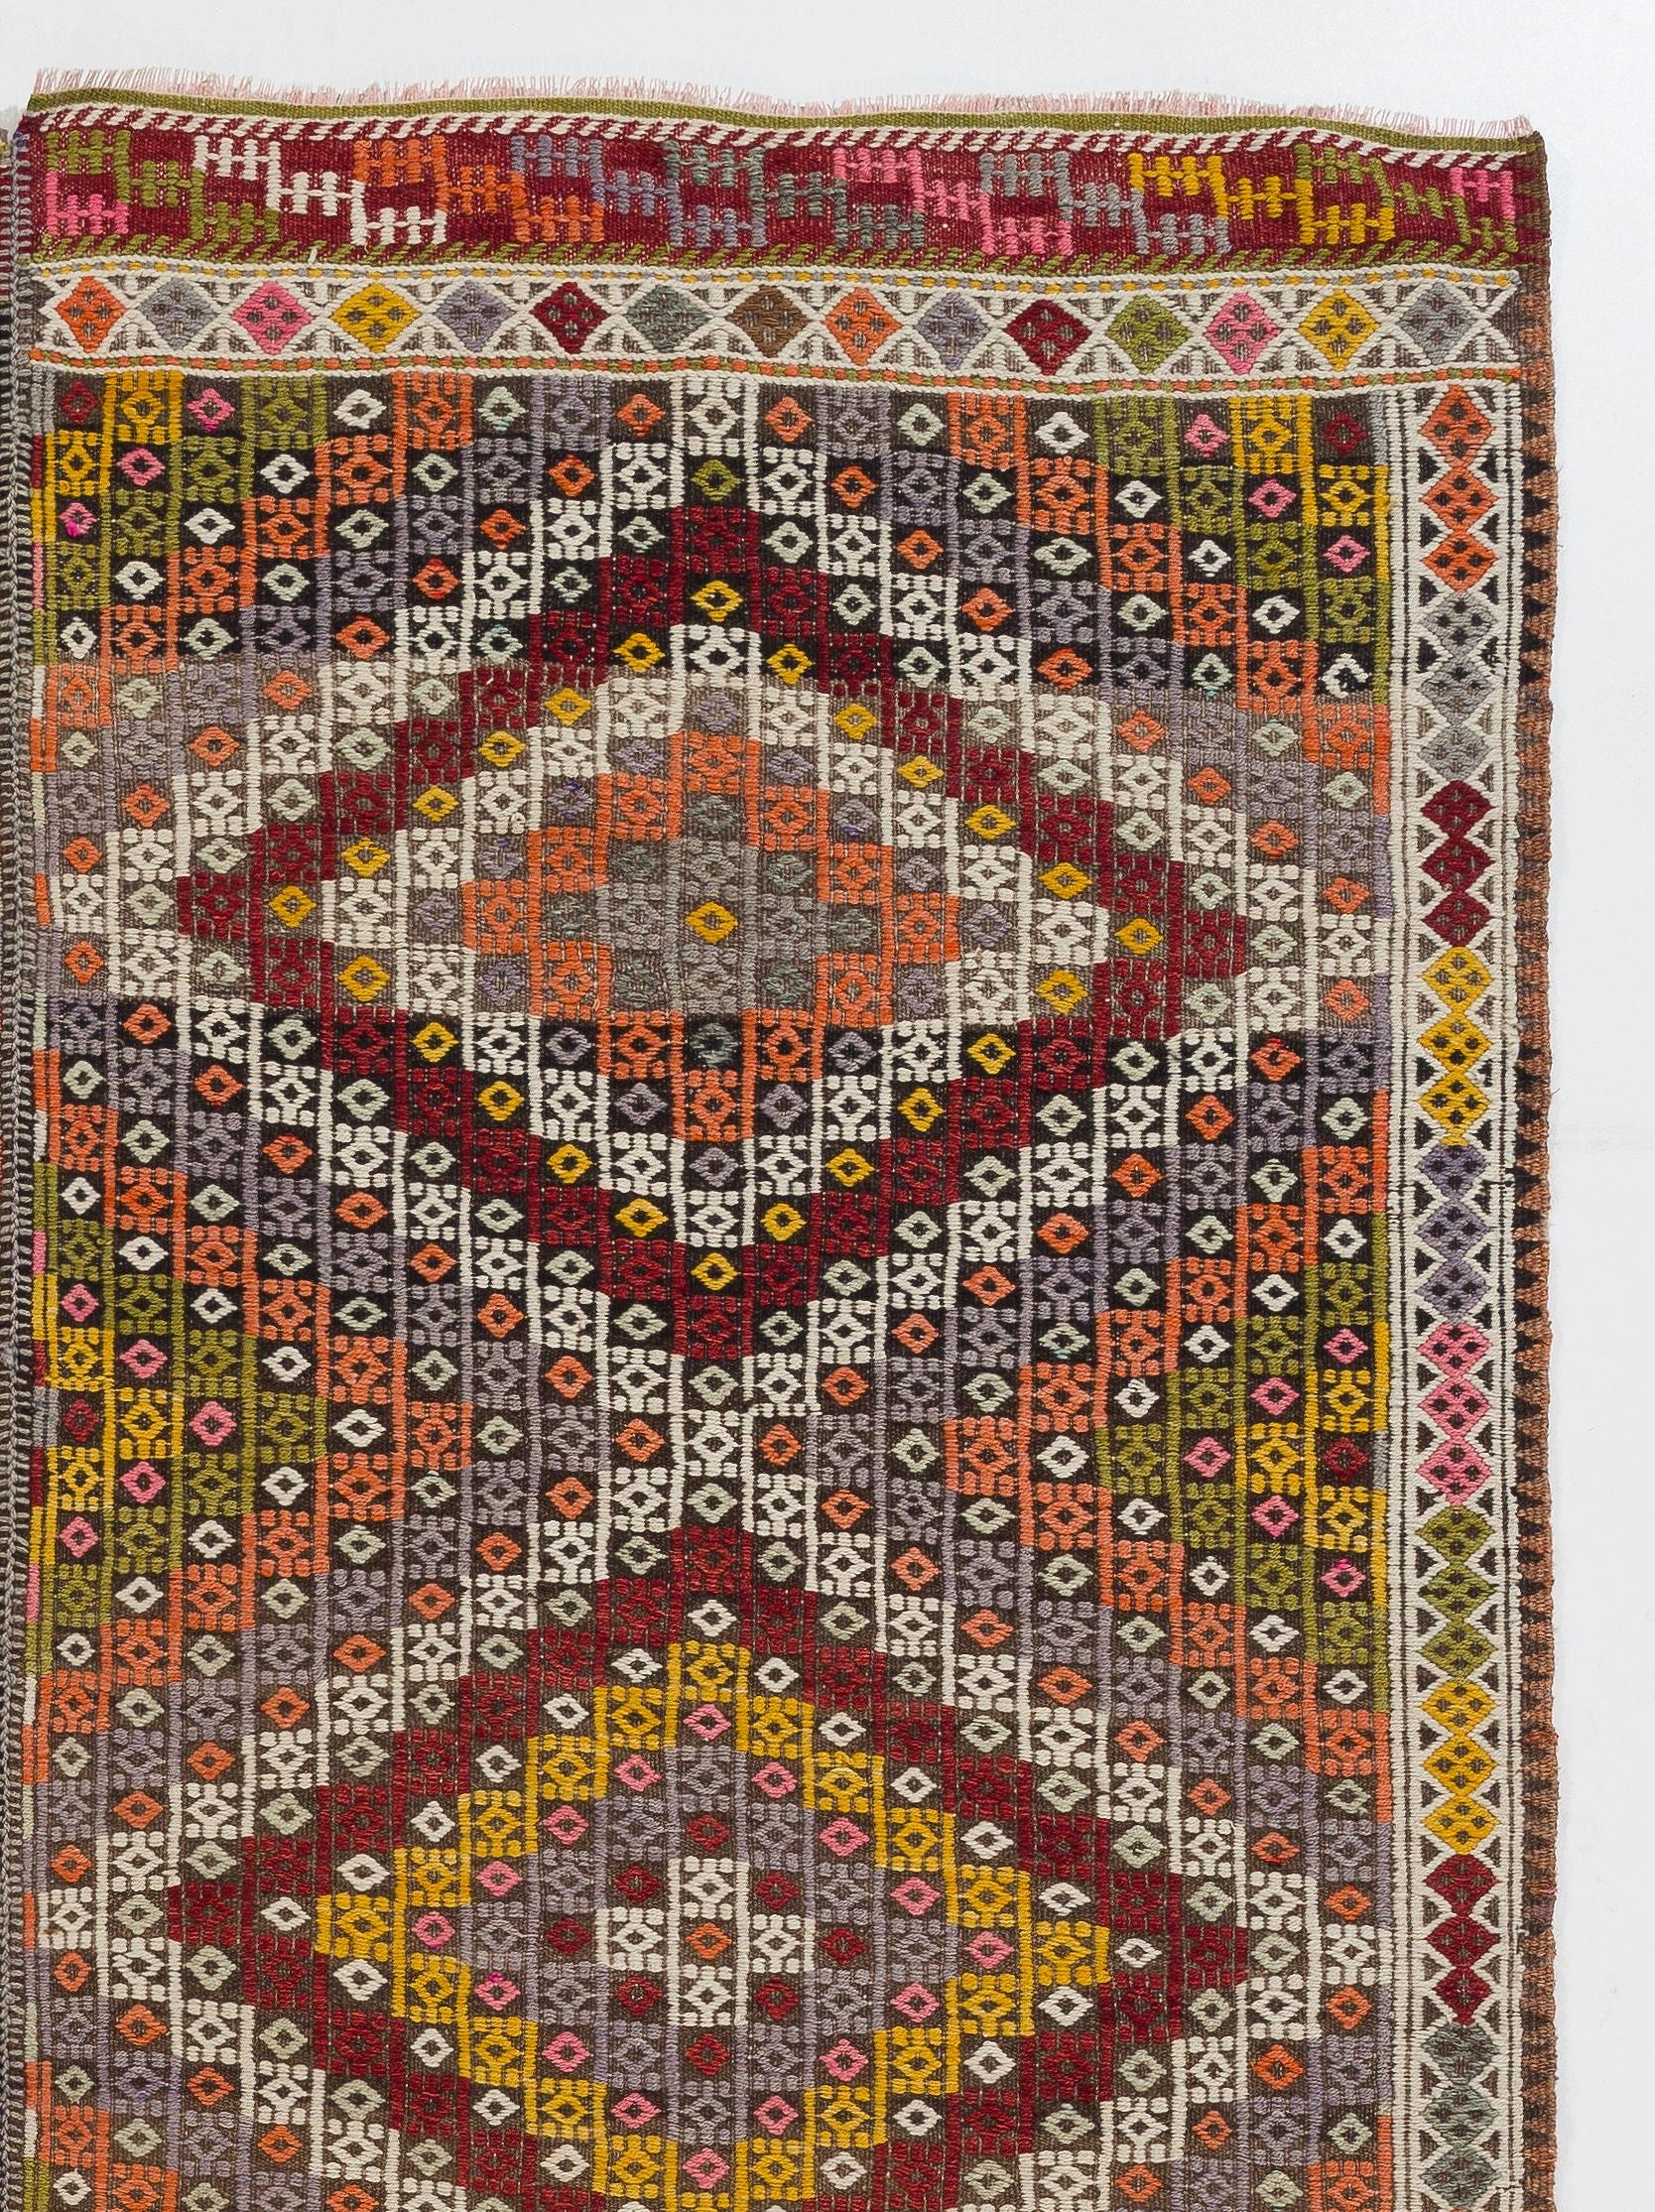 6x8 Ft Multicolored Hand-Woven Turkish Jijim Kilim. Vintage Geometric Design Rug In Good Condition For Sale In Philadelphia, PA